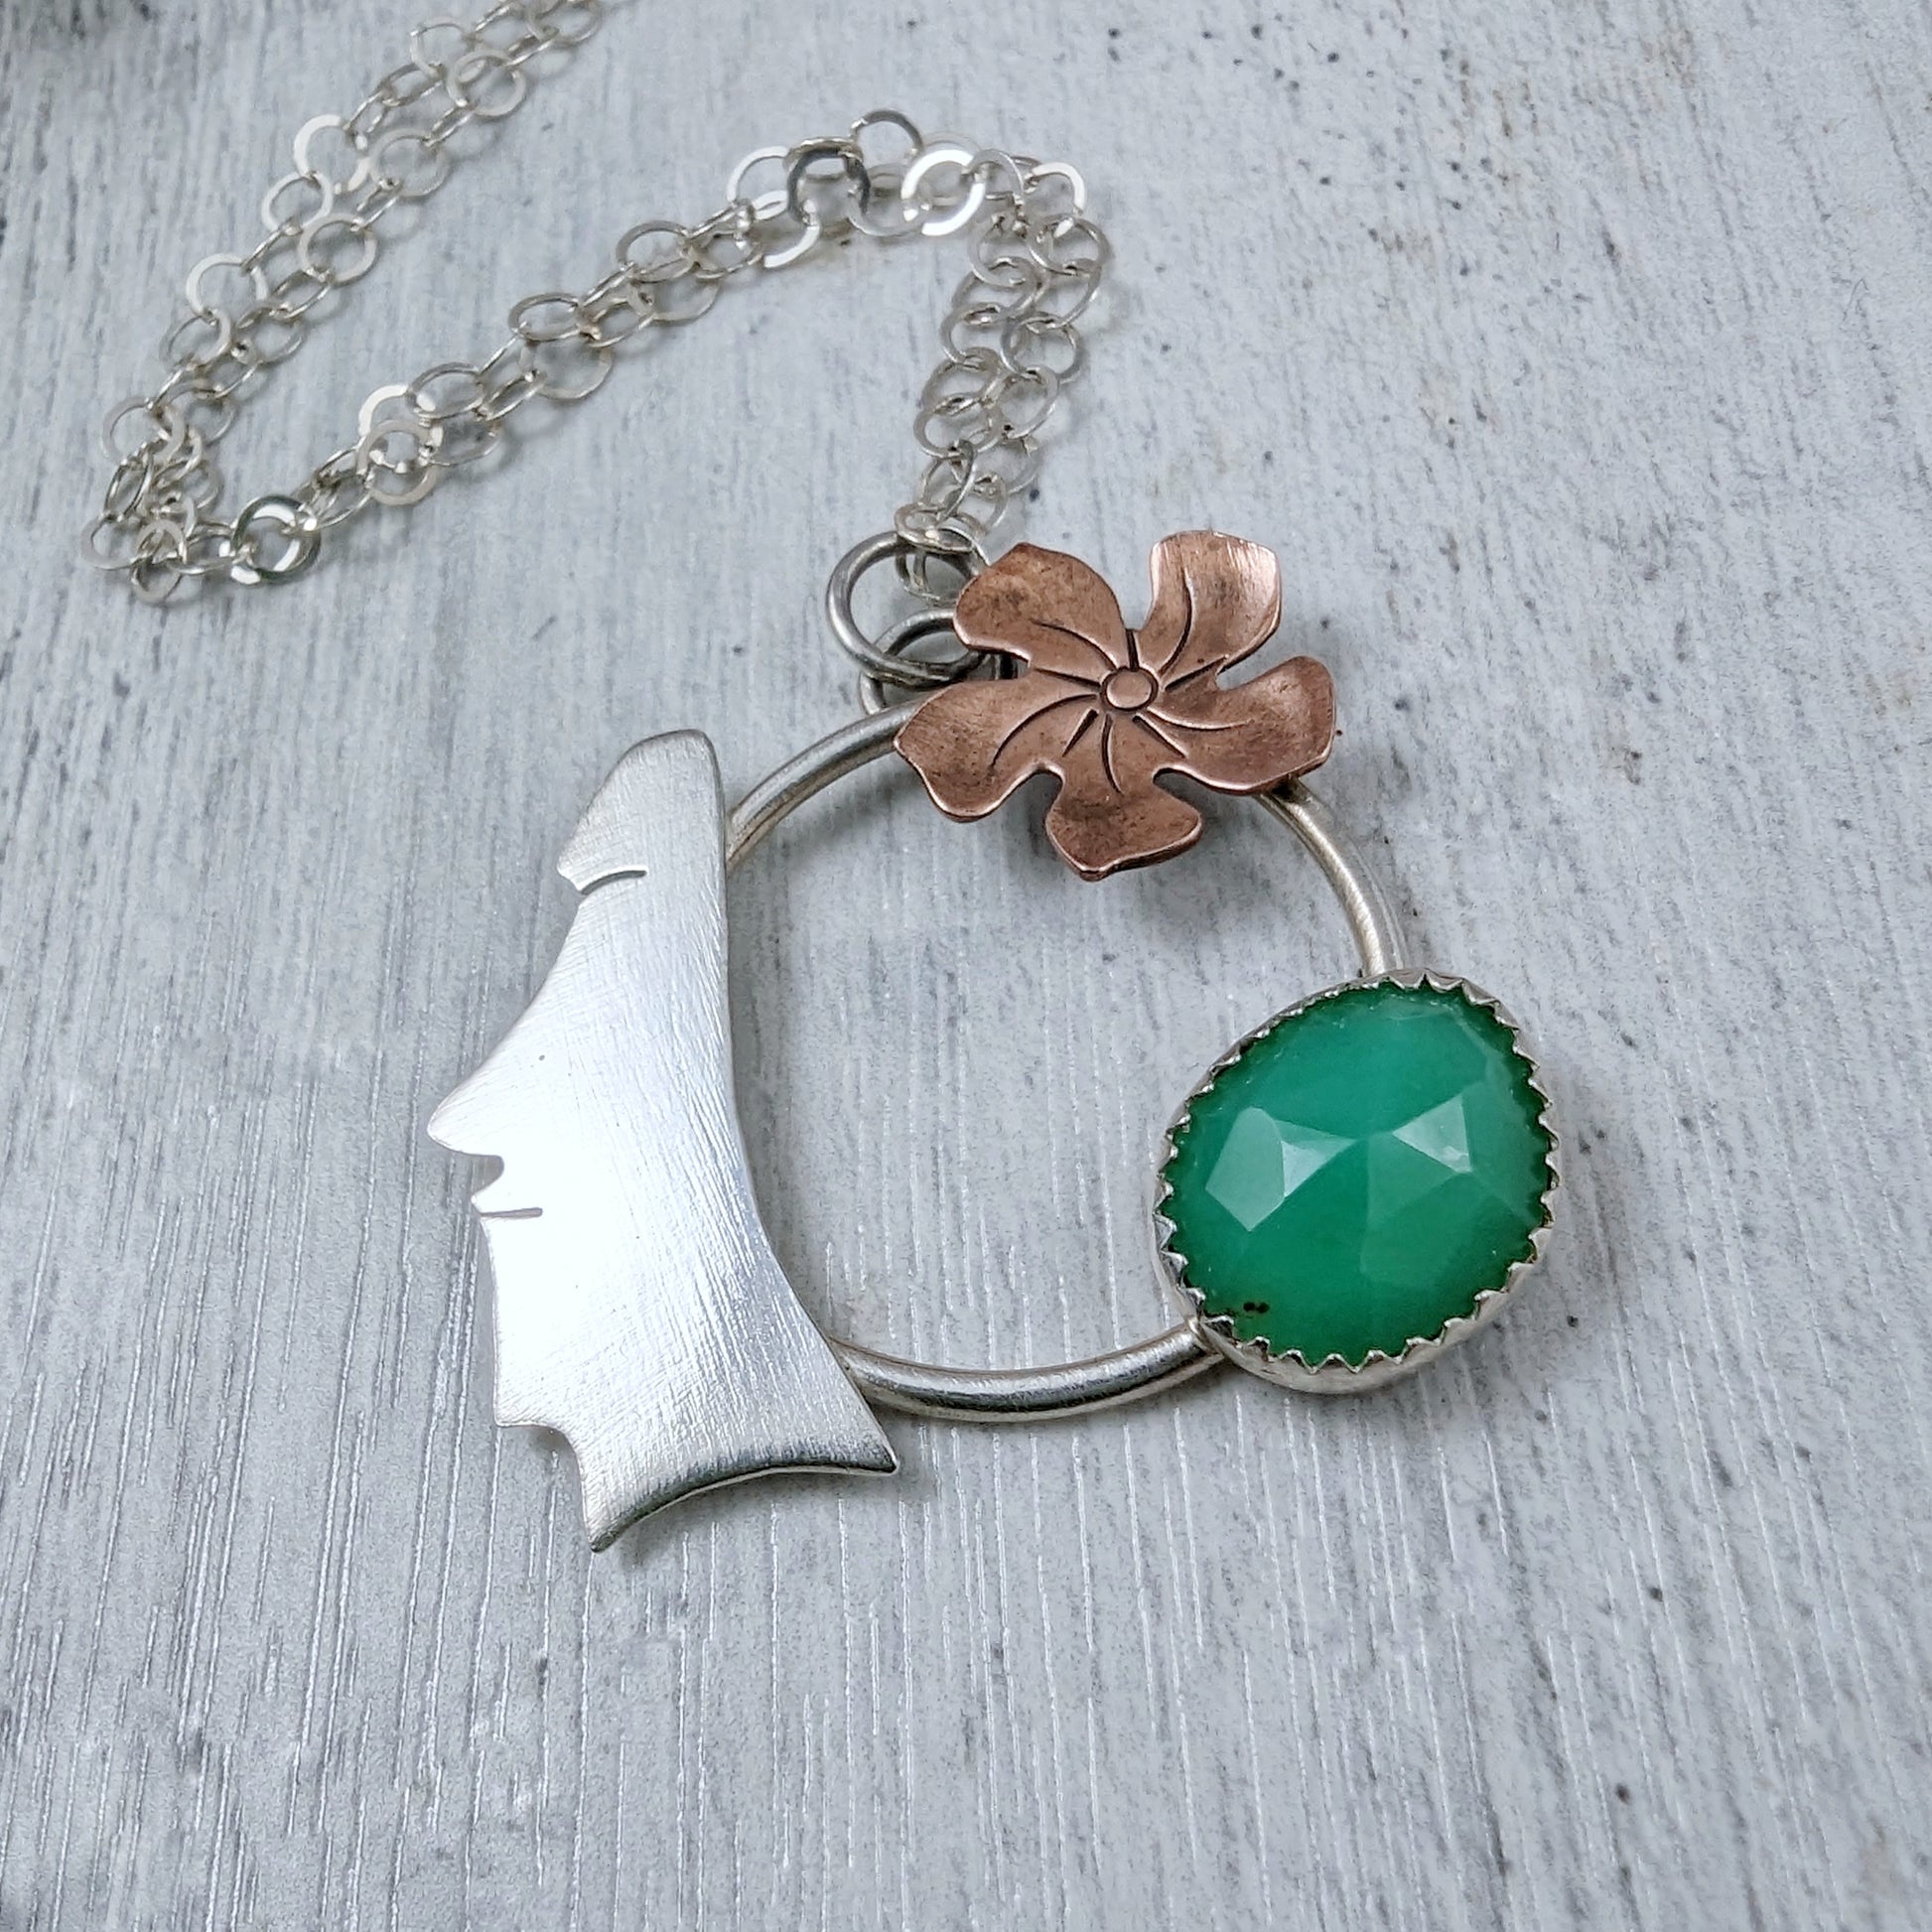 Sterling silver, copper, and chrysoprase necklace on light gray background